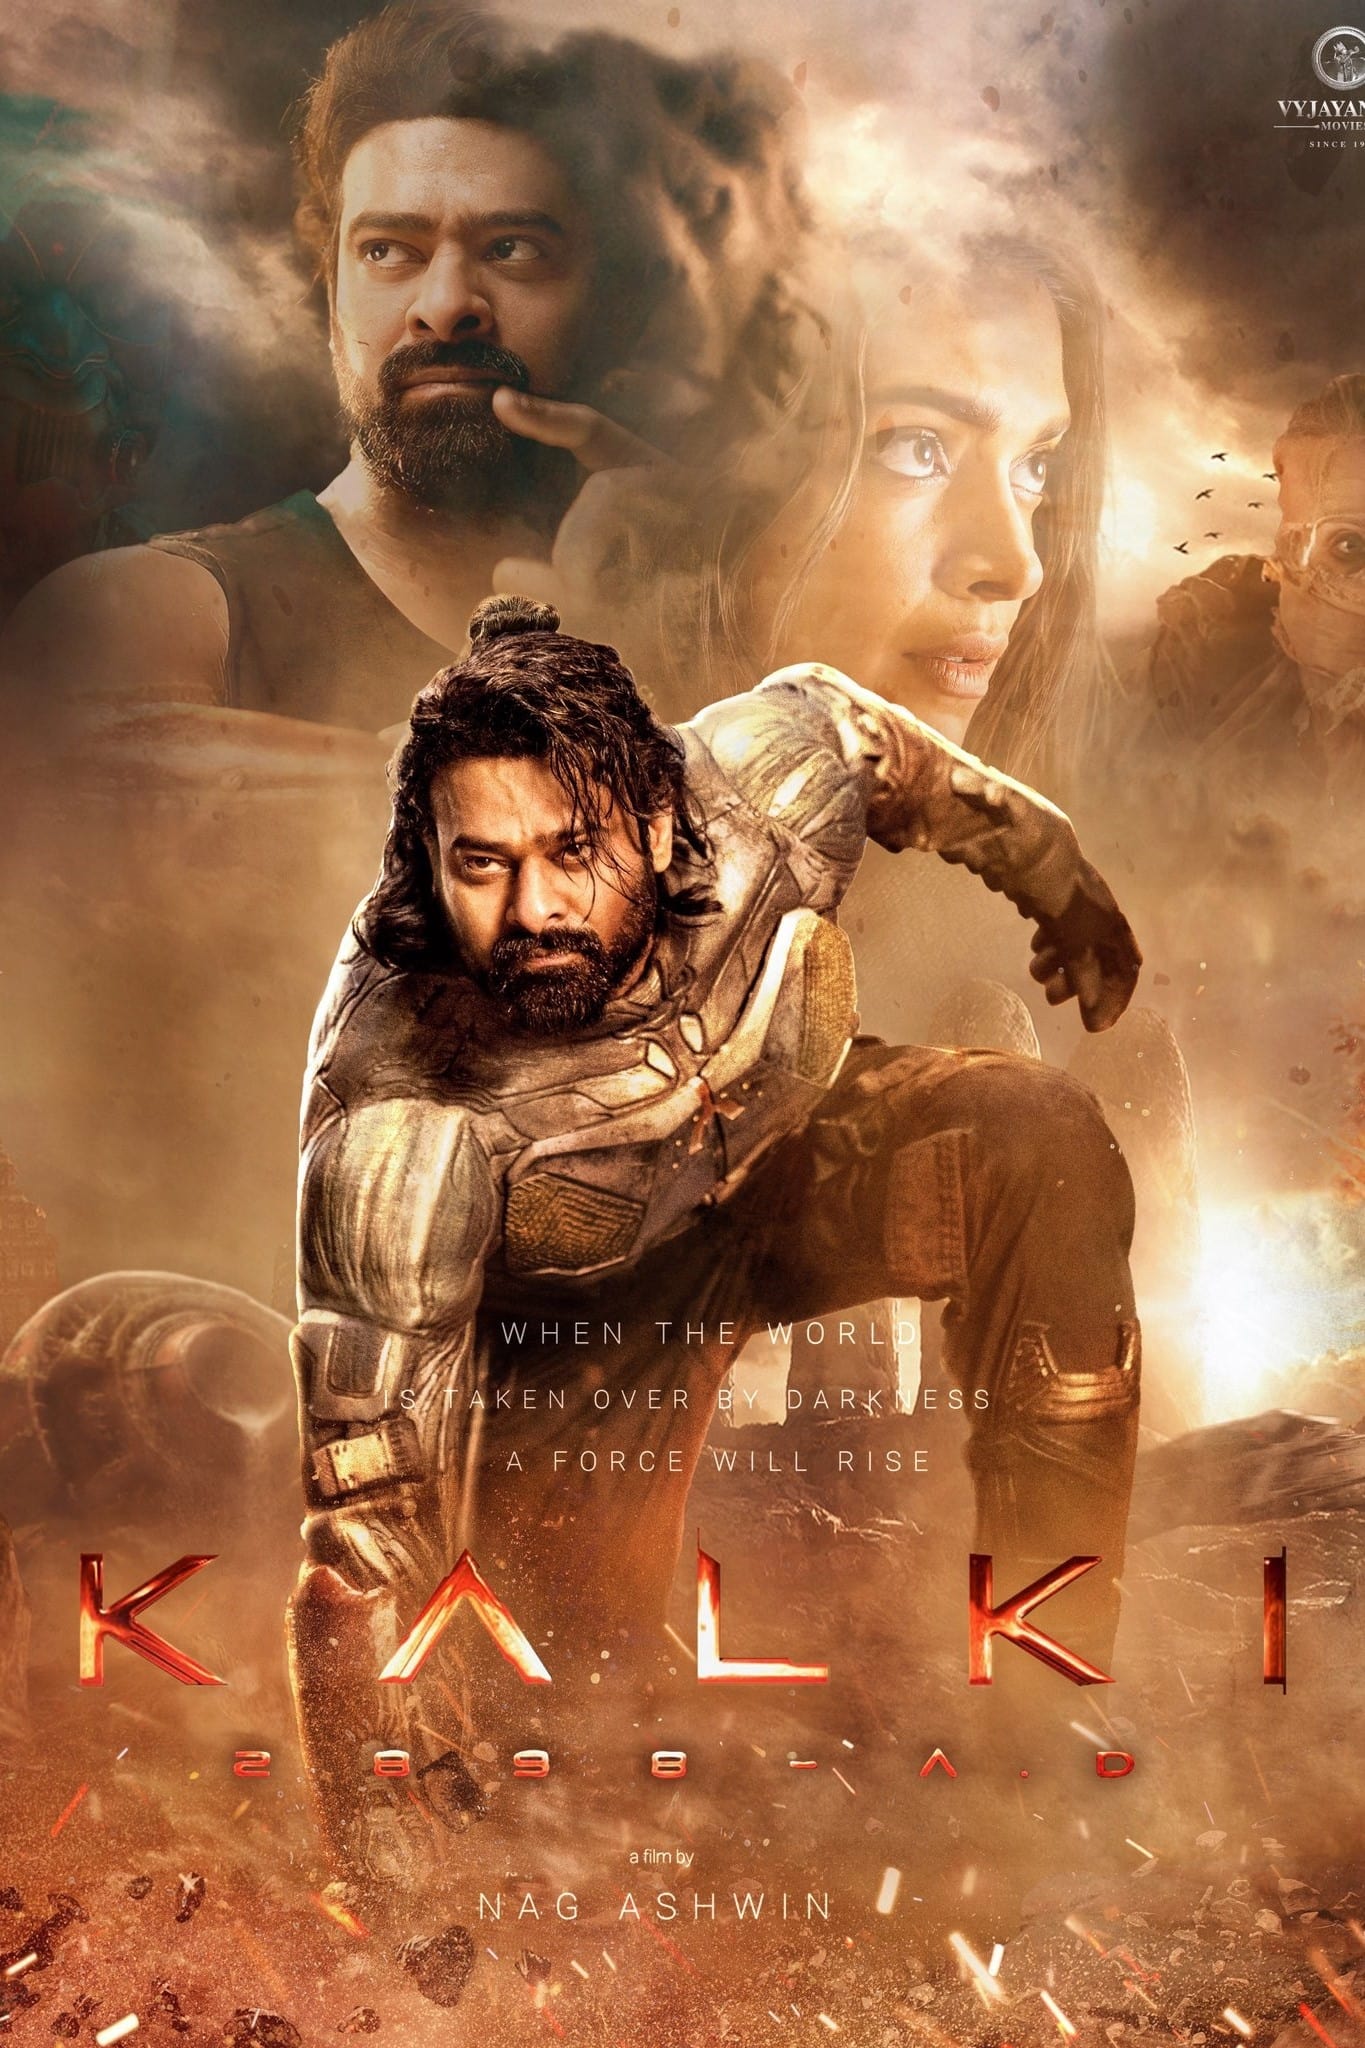 Poster for the movie "KALKI 2898 A.D"